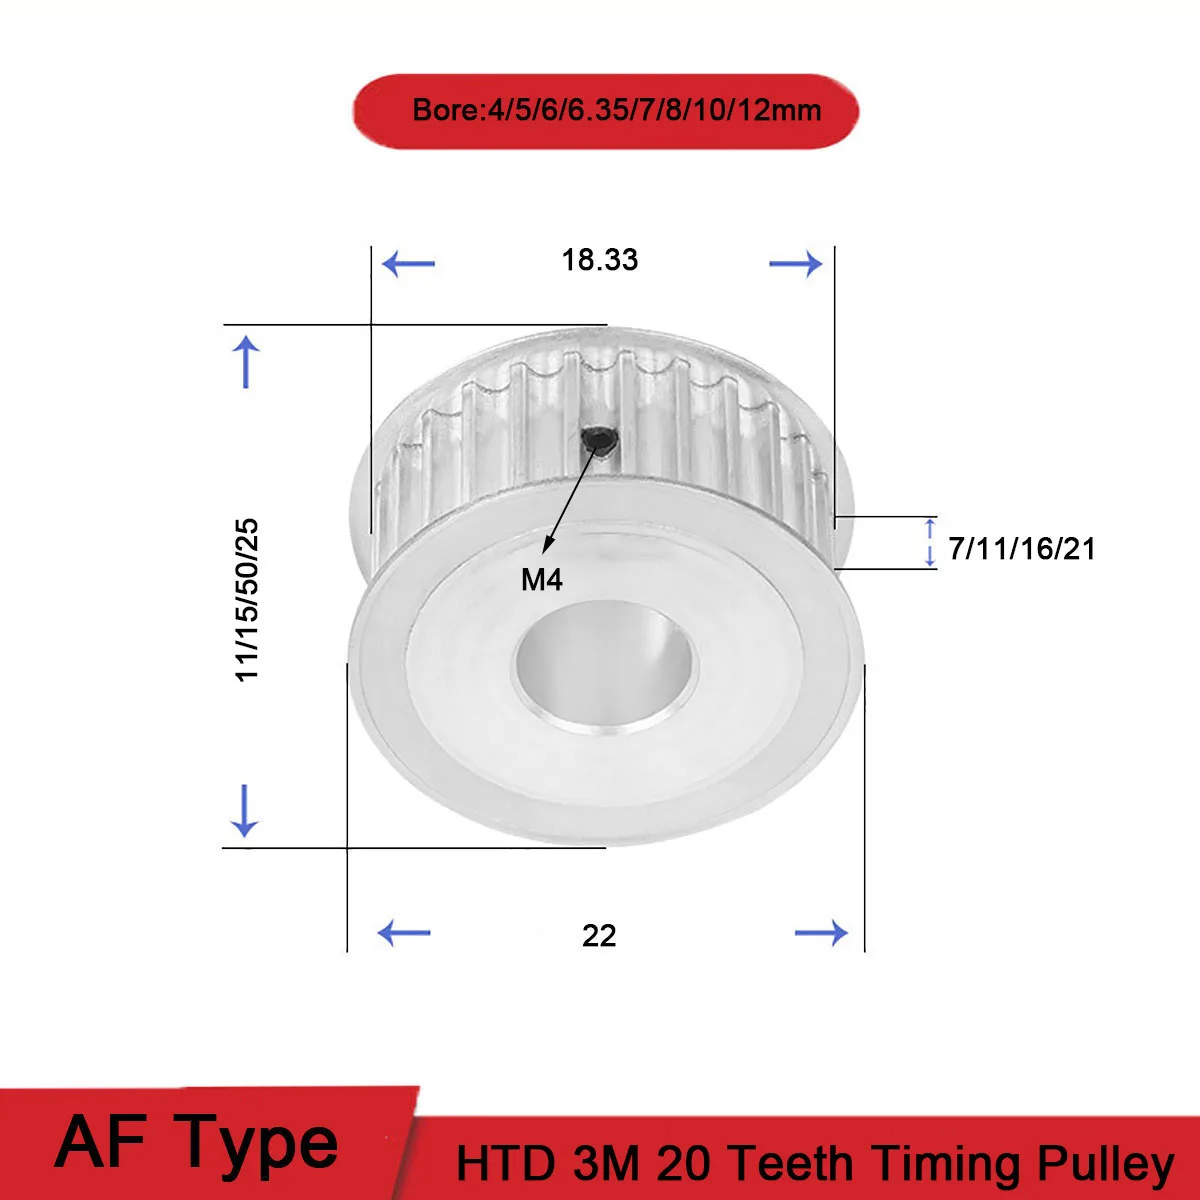 HTD 3M 20T Timing Pulley Bore 4mm~12mm Gear Pulley 3mm Pitch Teeth Width 7/11/16mm Aluminum Synchronous Timing Belt Pulley